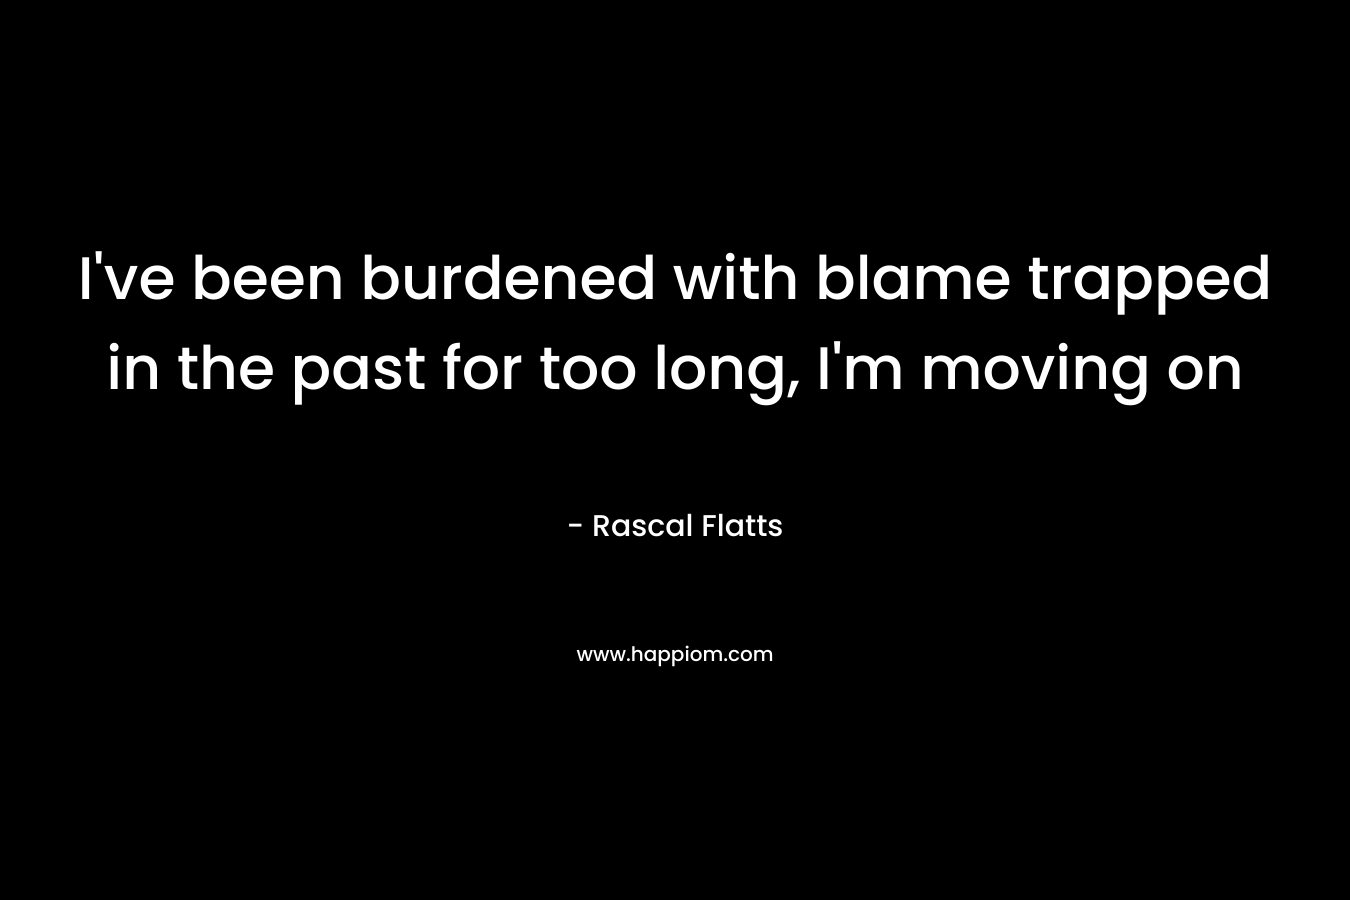 I’ve been burdened with blame trapped in the past for too long, I’m moving on – Rascal Flatts